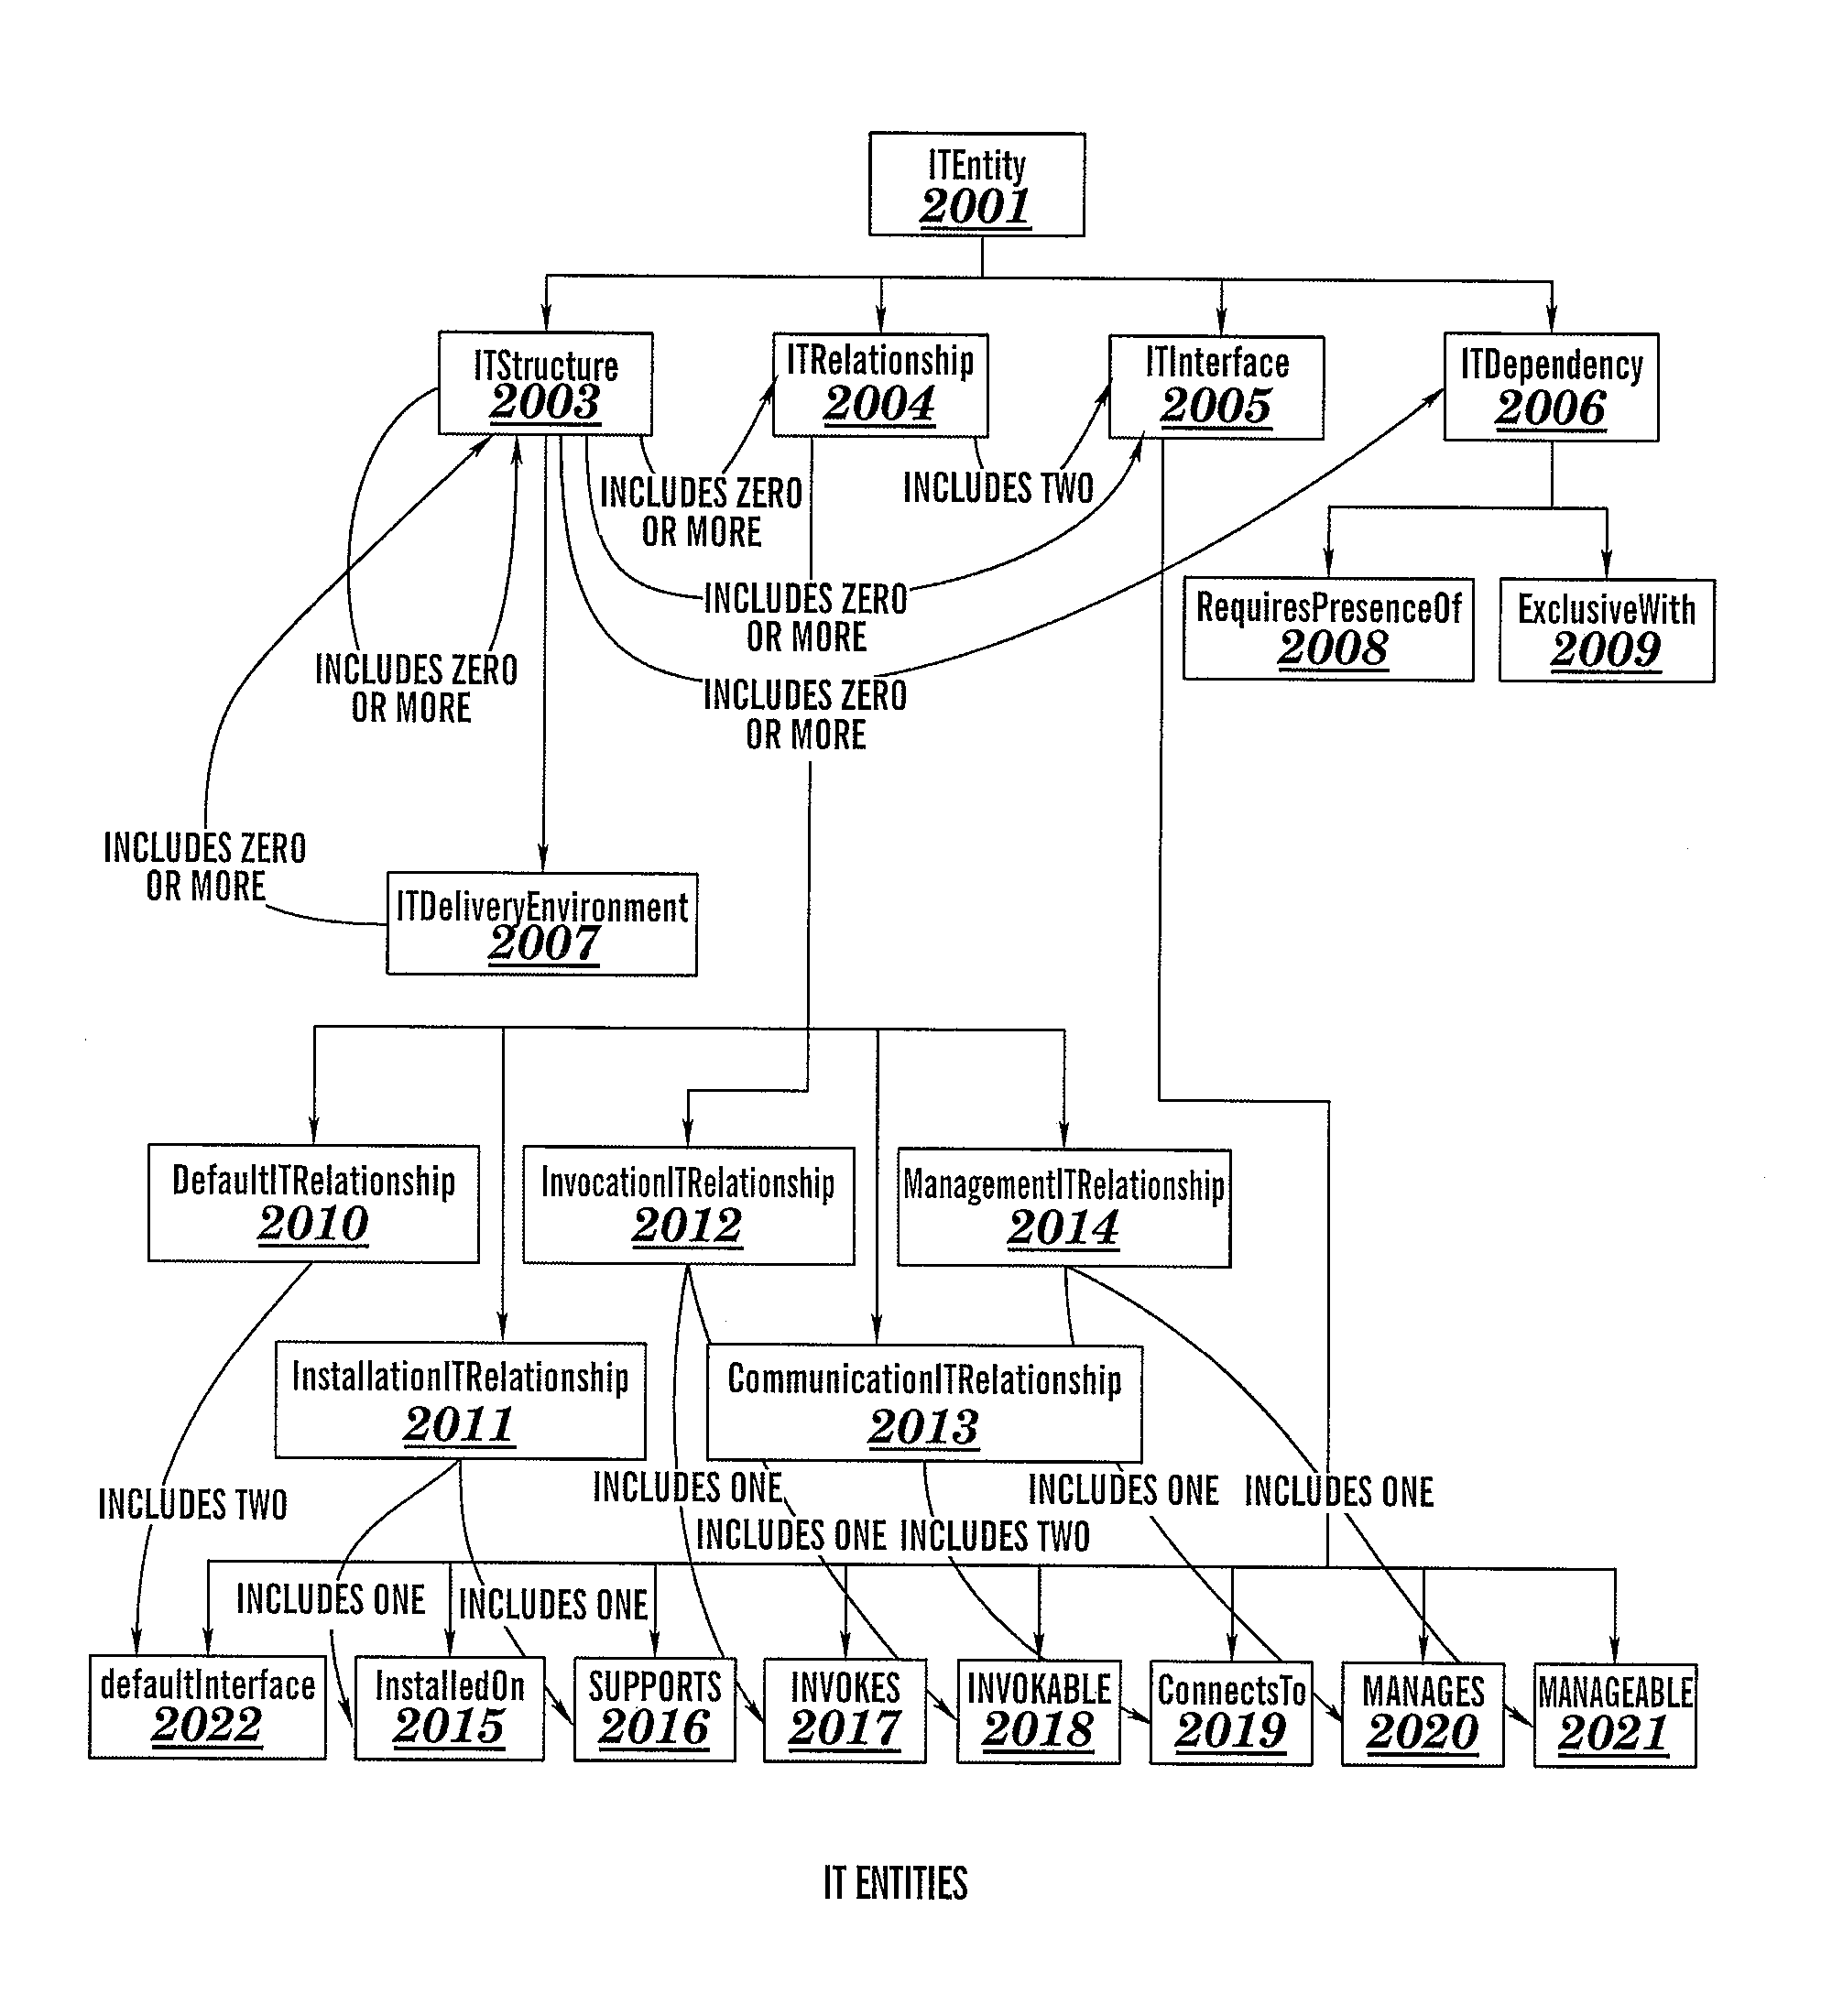 Verification of correctness of networking aspects of an information technology system